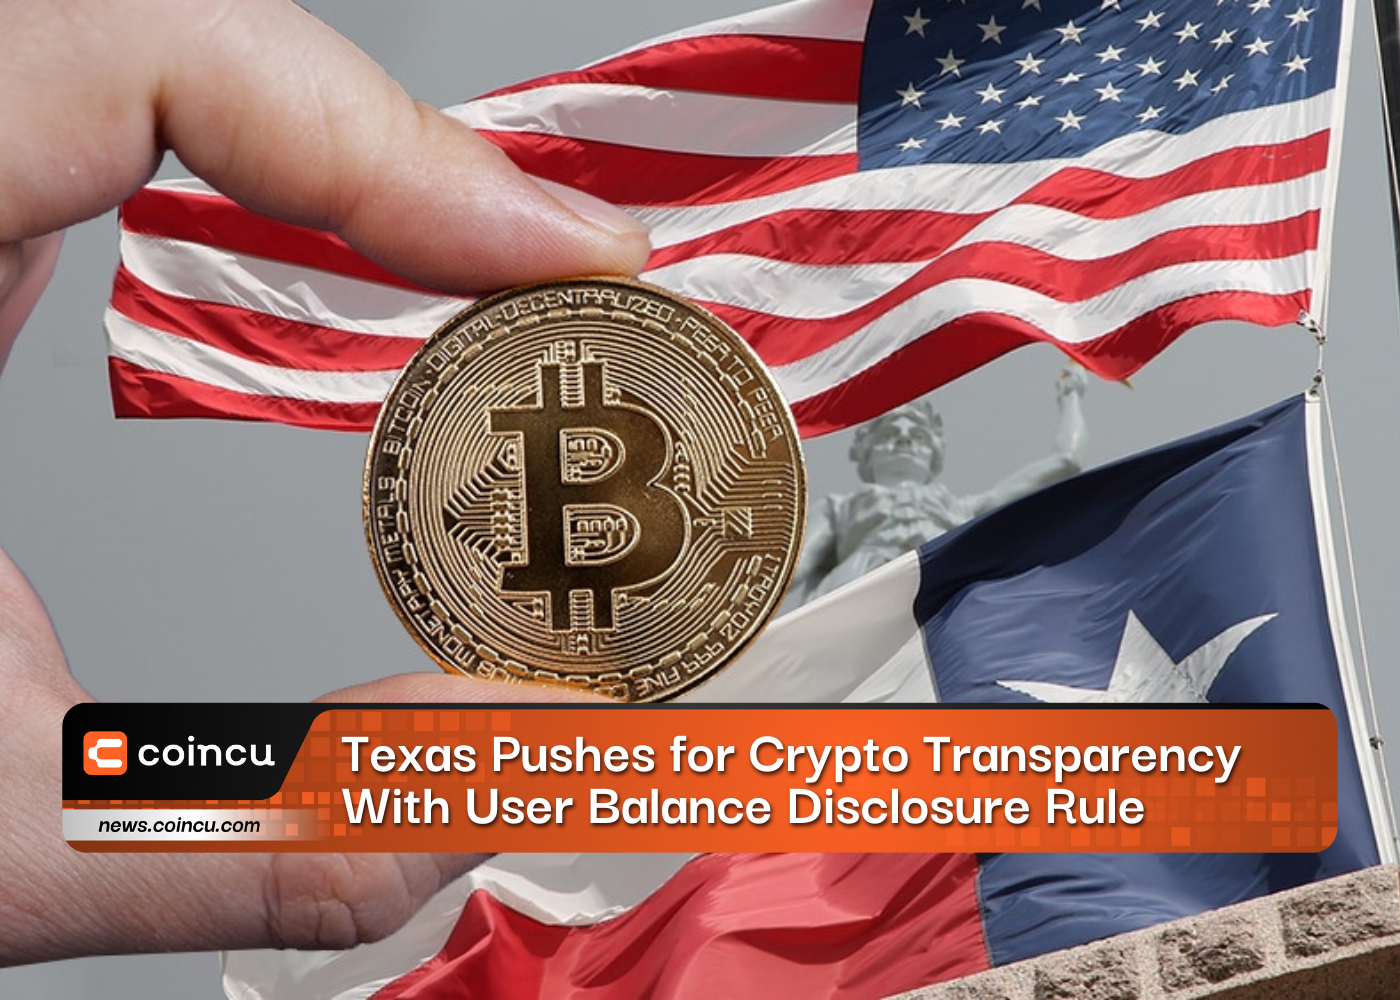 Texas Pushes for Crypto Transparency